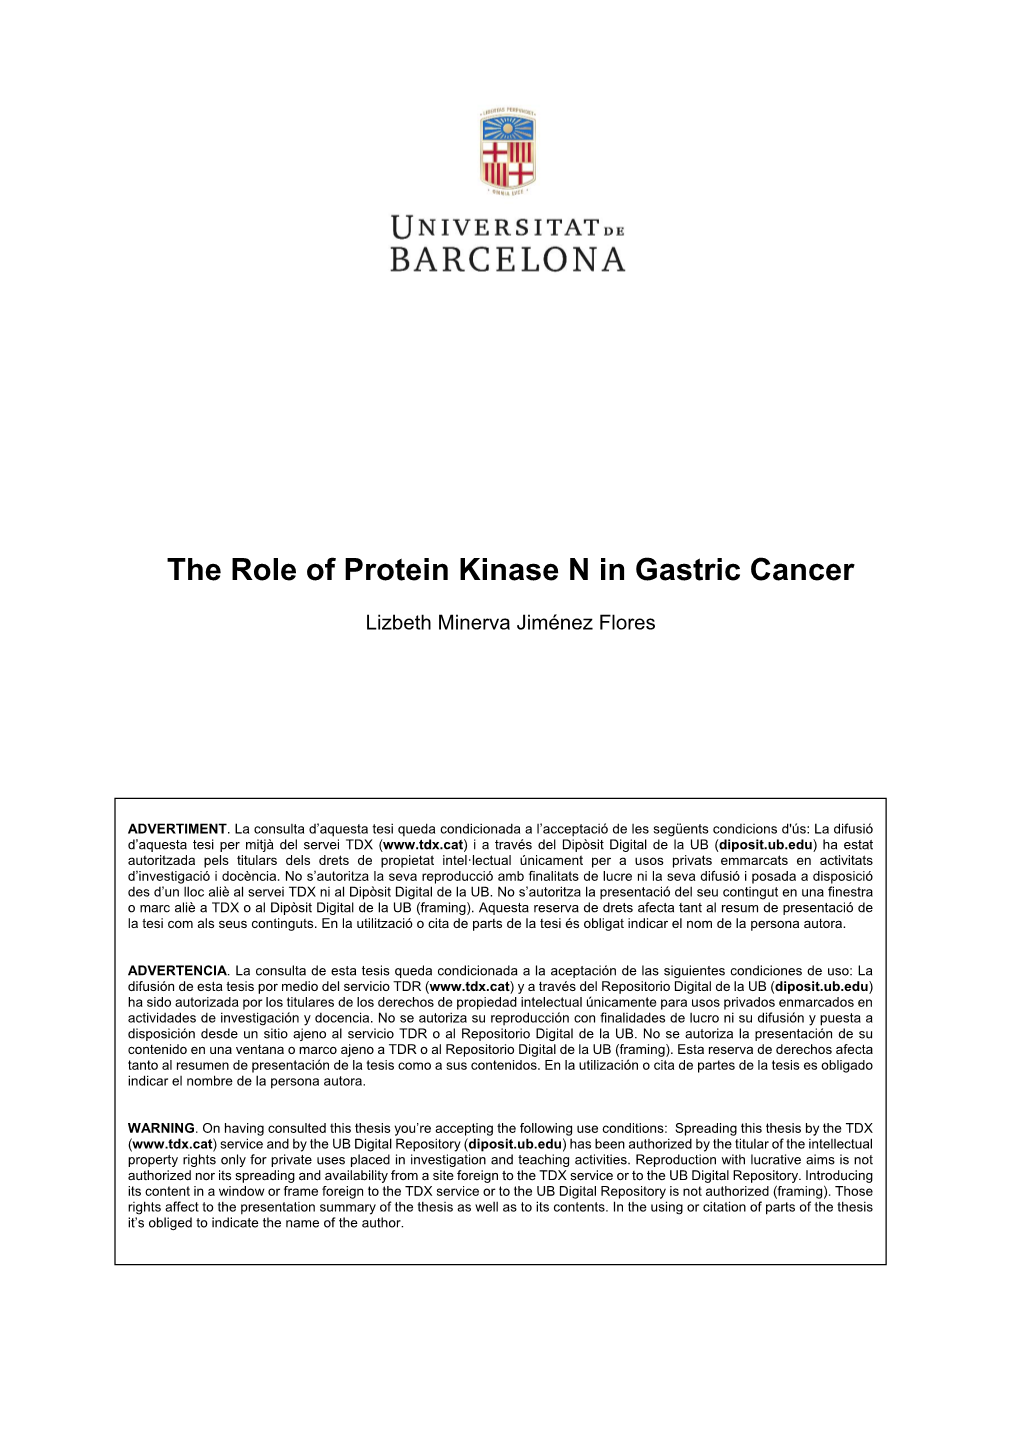 The Role of Protein Kinase N in Gastric Cancer